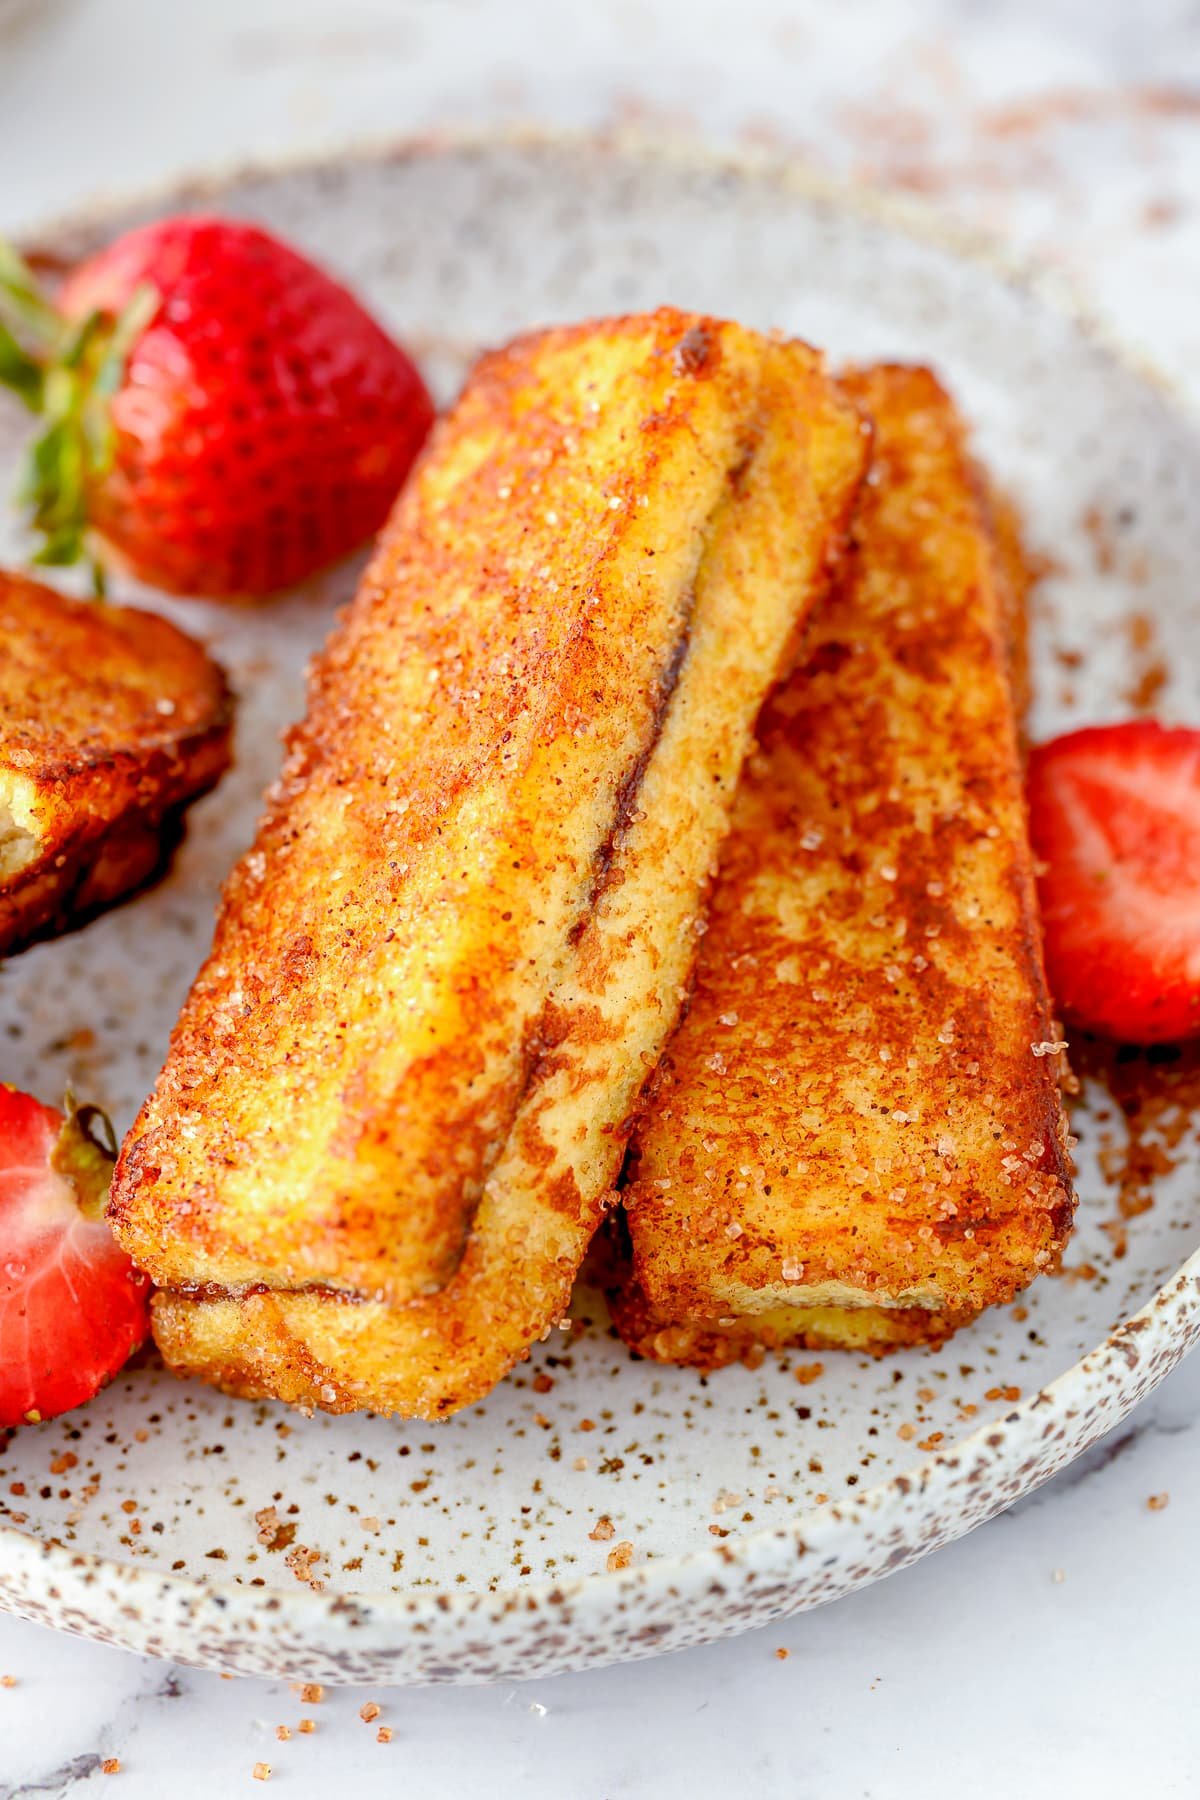 Overhead of two Nutella French Toast Sticks layered on plate with strawberries.